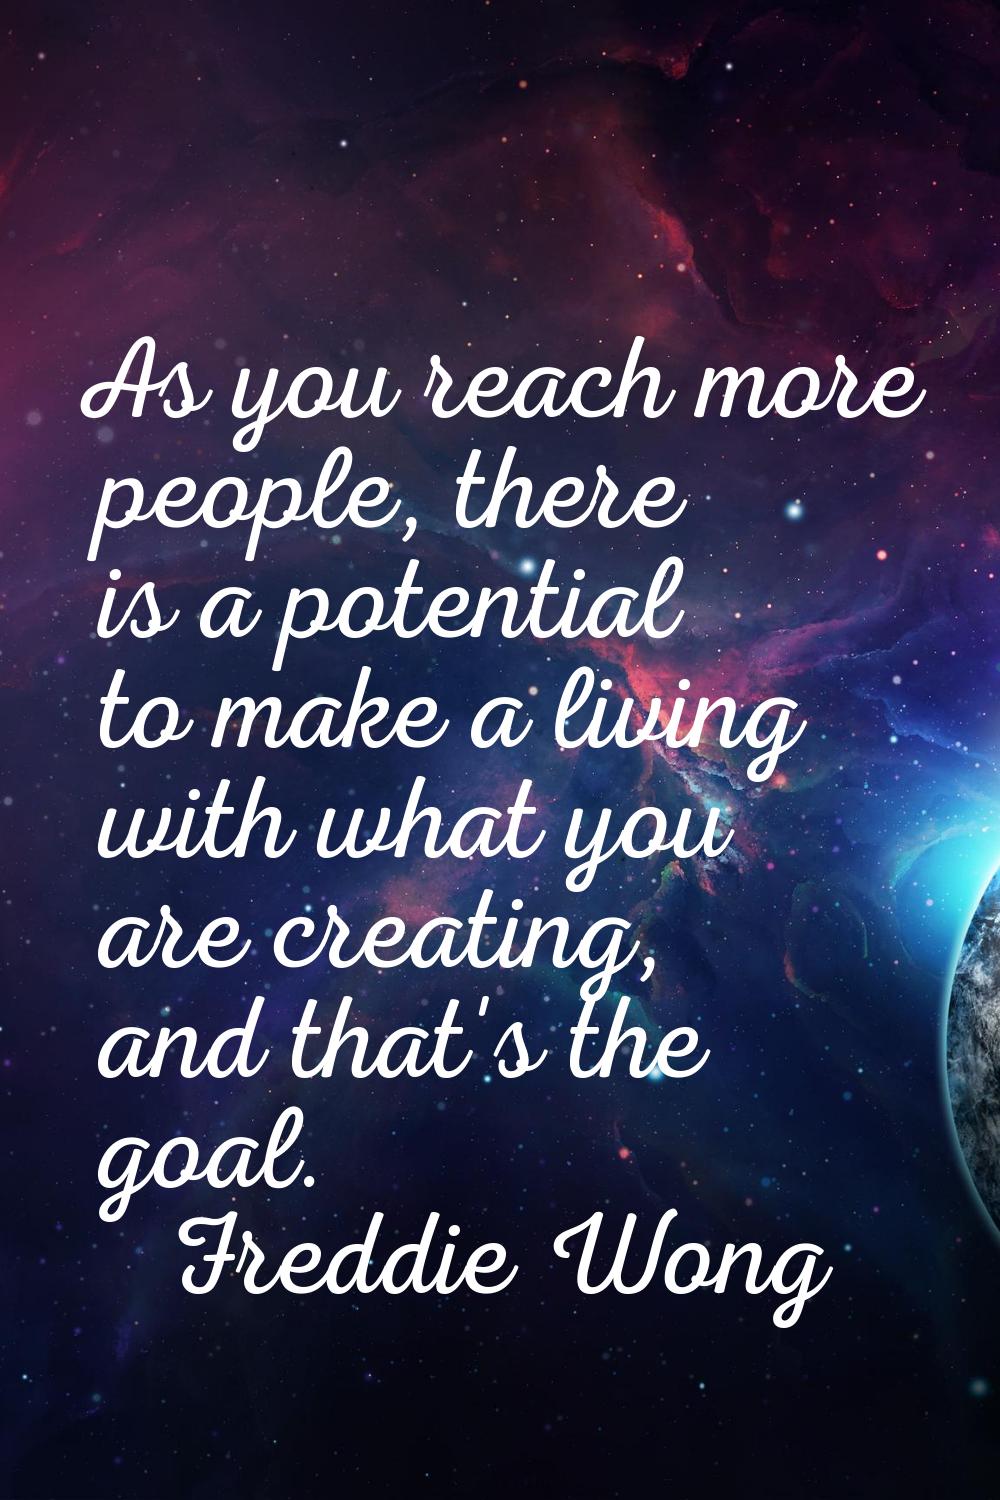 As you reach more people, there is a potential to make a living with what you are creating, and tha